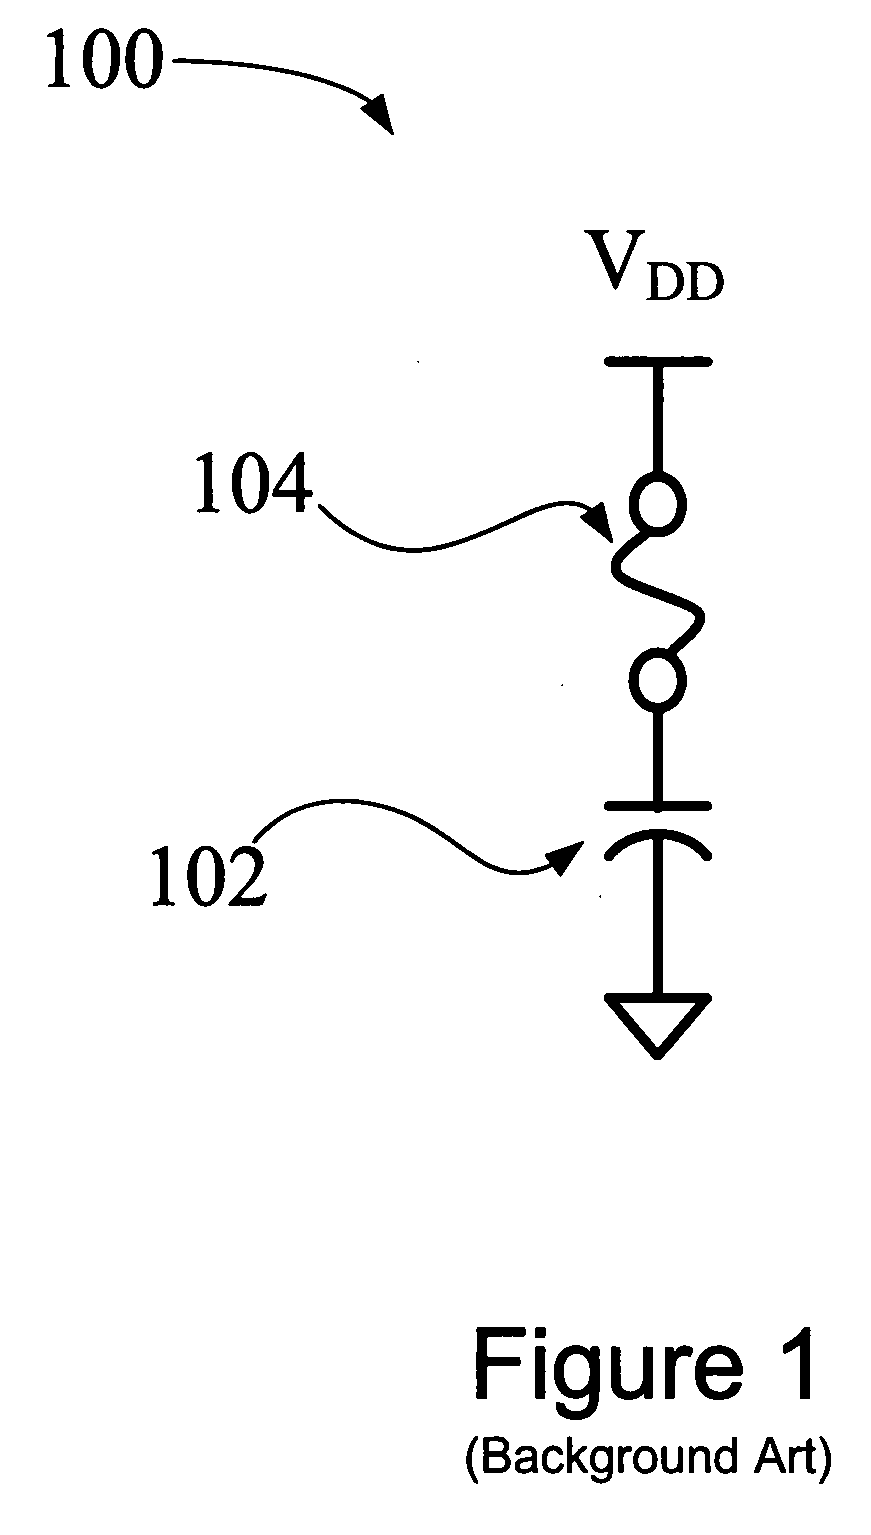 Decoupling capacitor control circuit and method for enhanced ESD performance